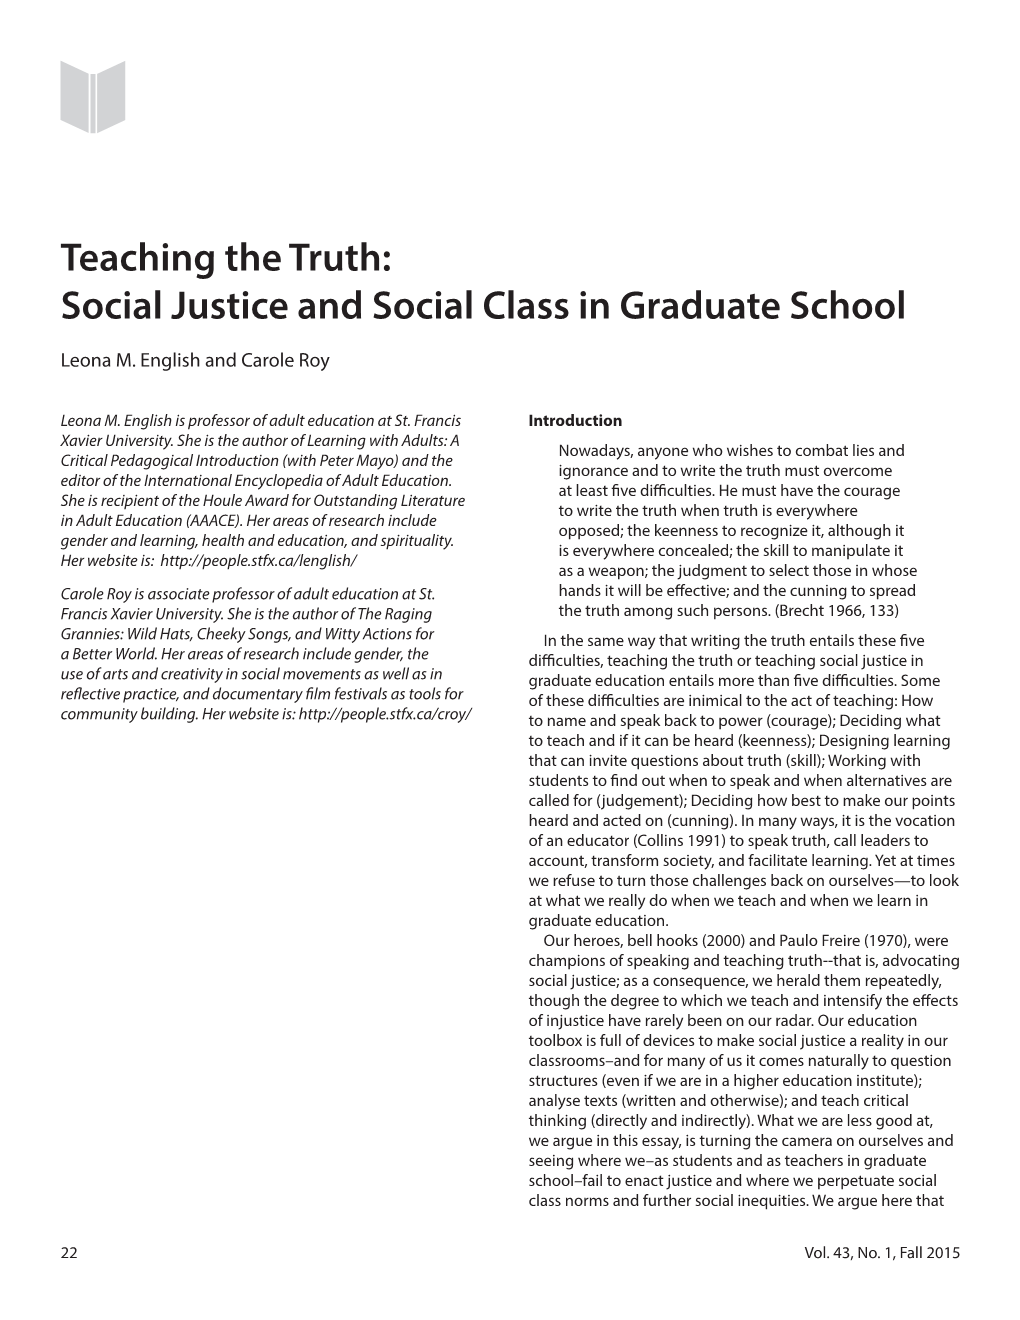 Teaching the Truth: Social Justice and Social Class in Graduate School